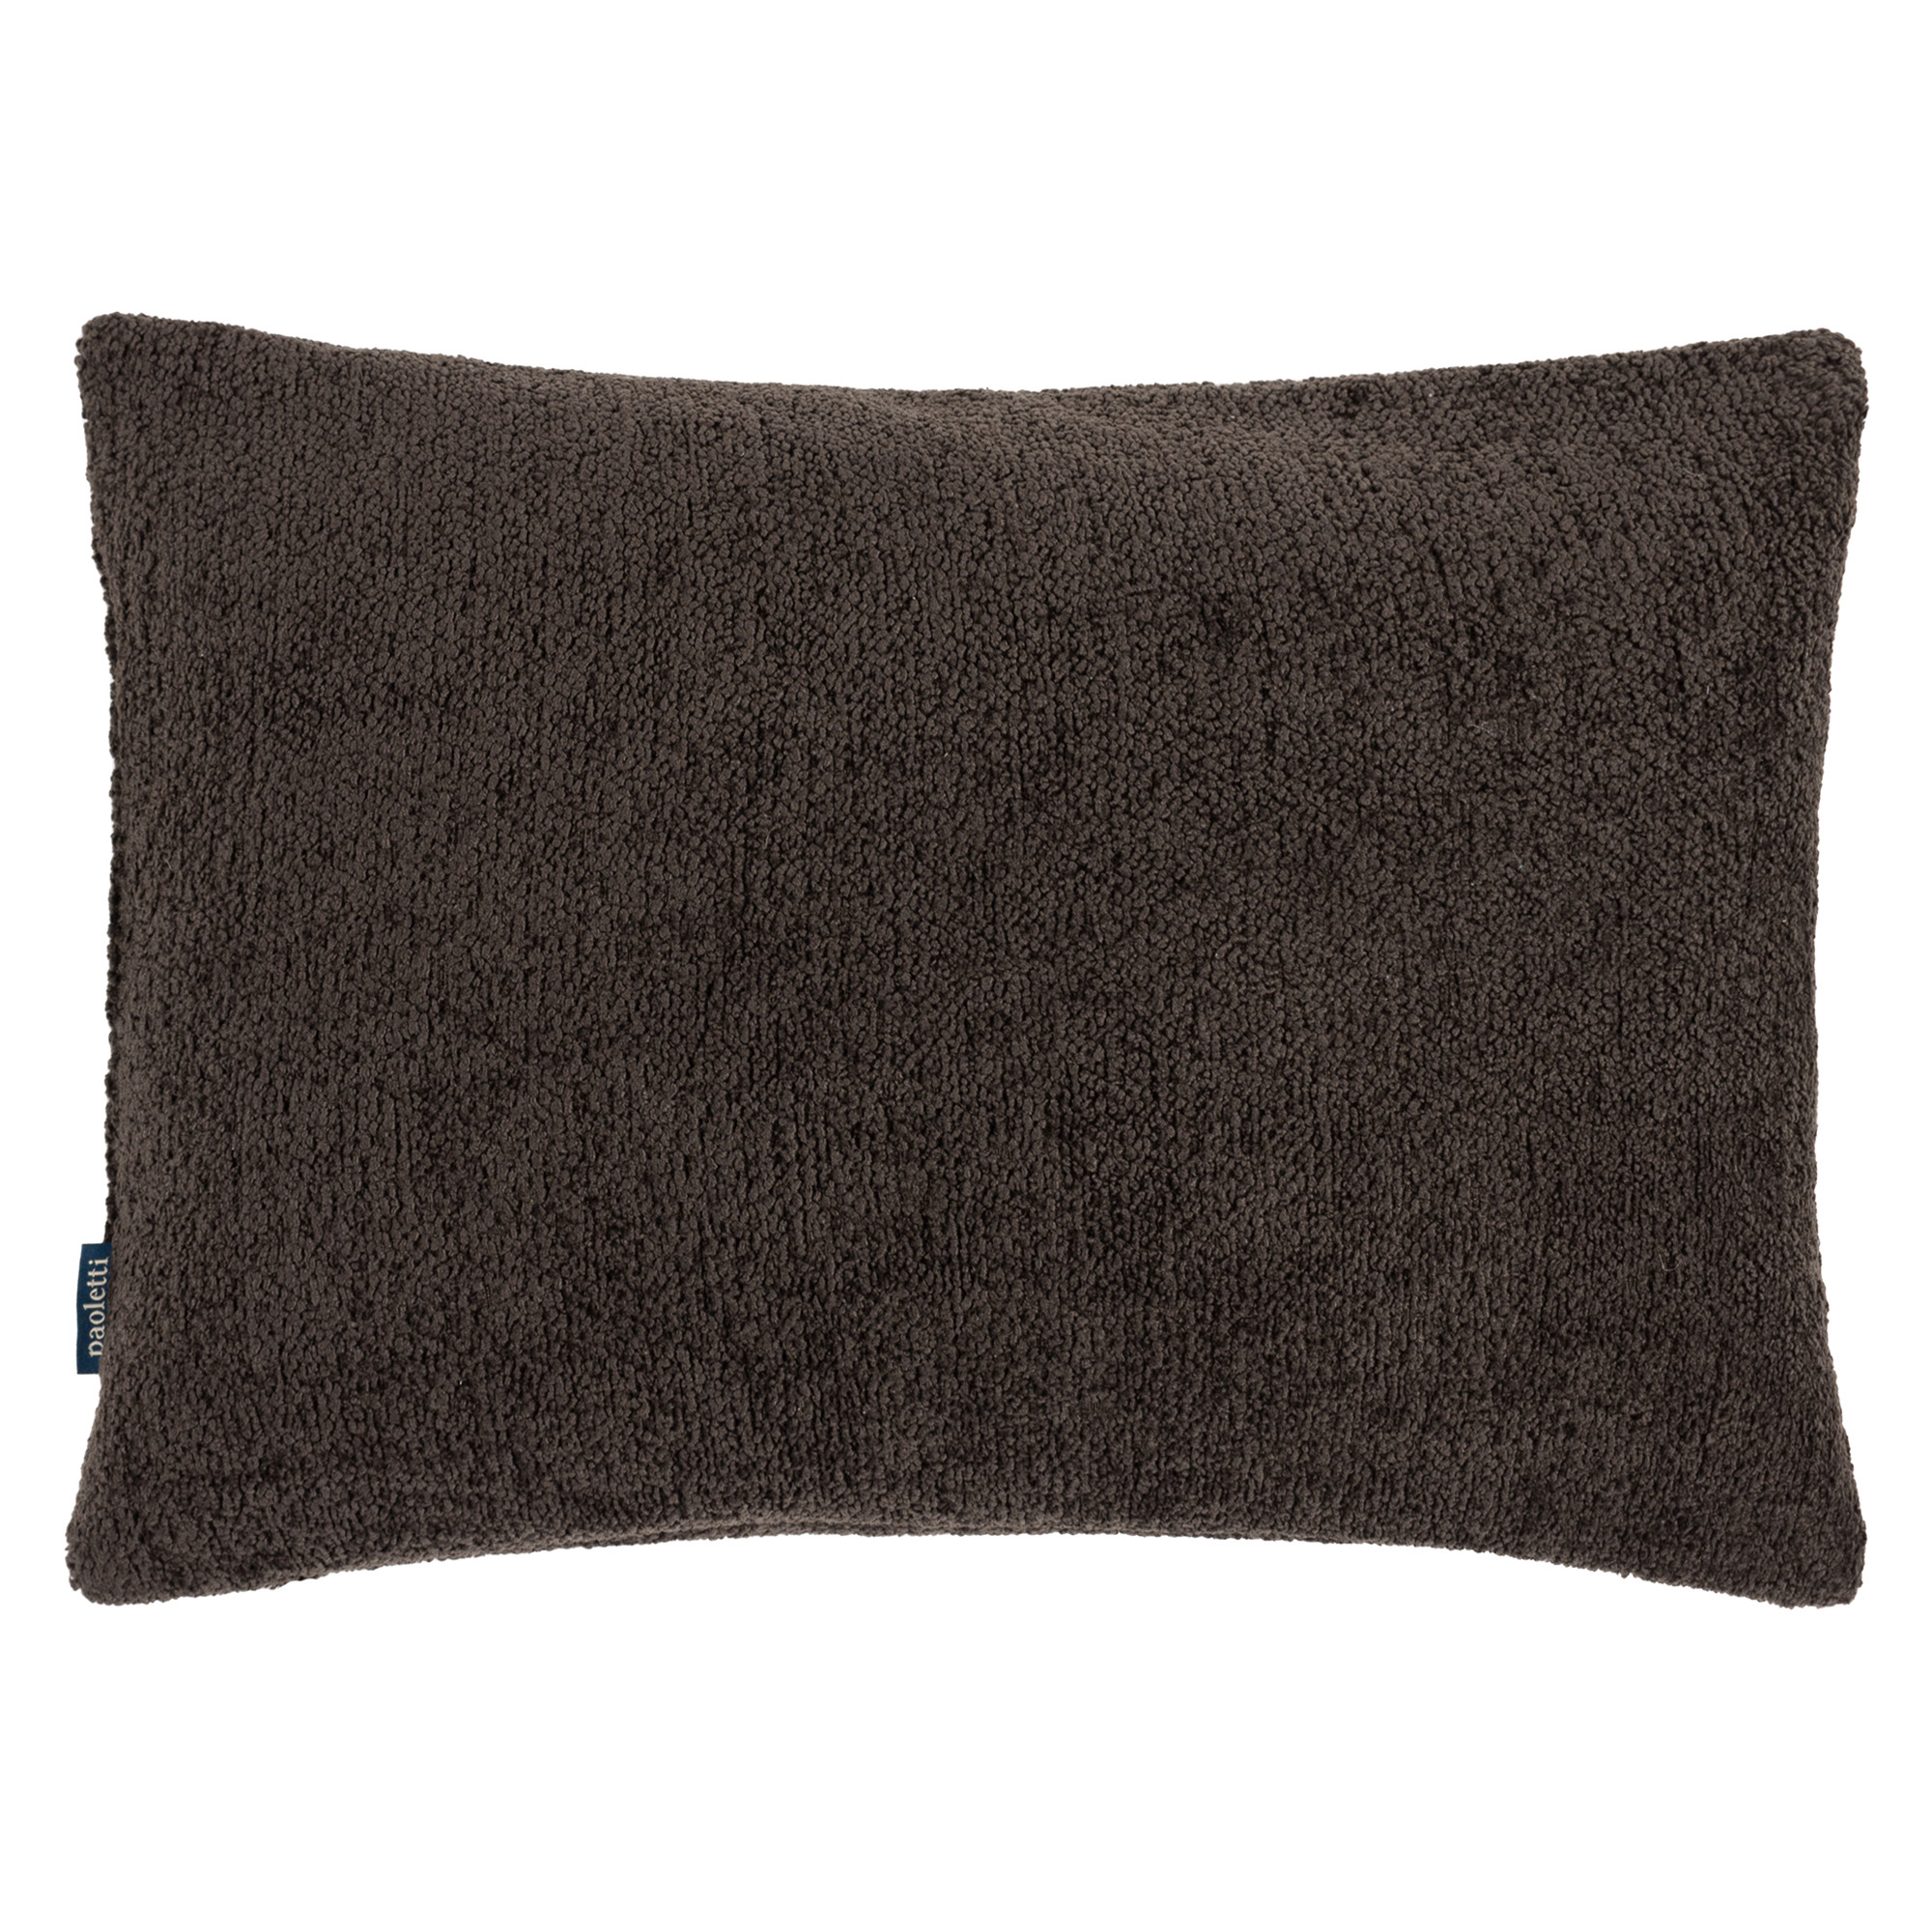 Umber Boucle Cushion, Square, Brown - Barker & Stonehouse - image 1